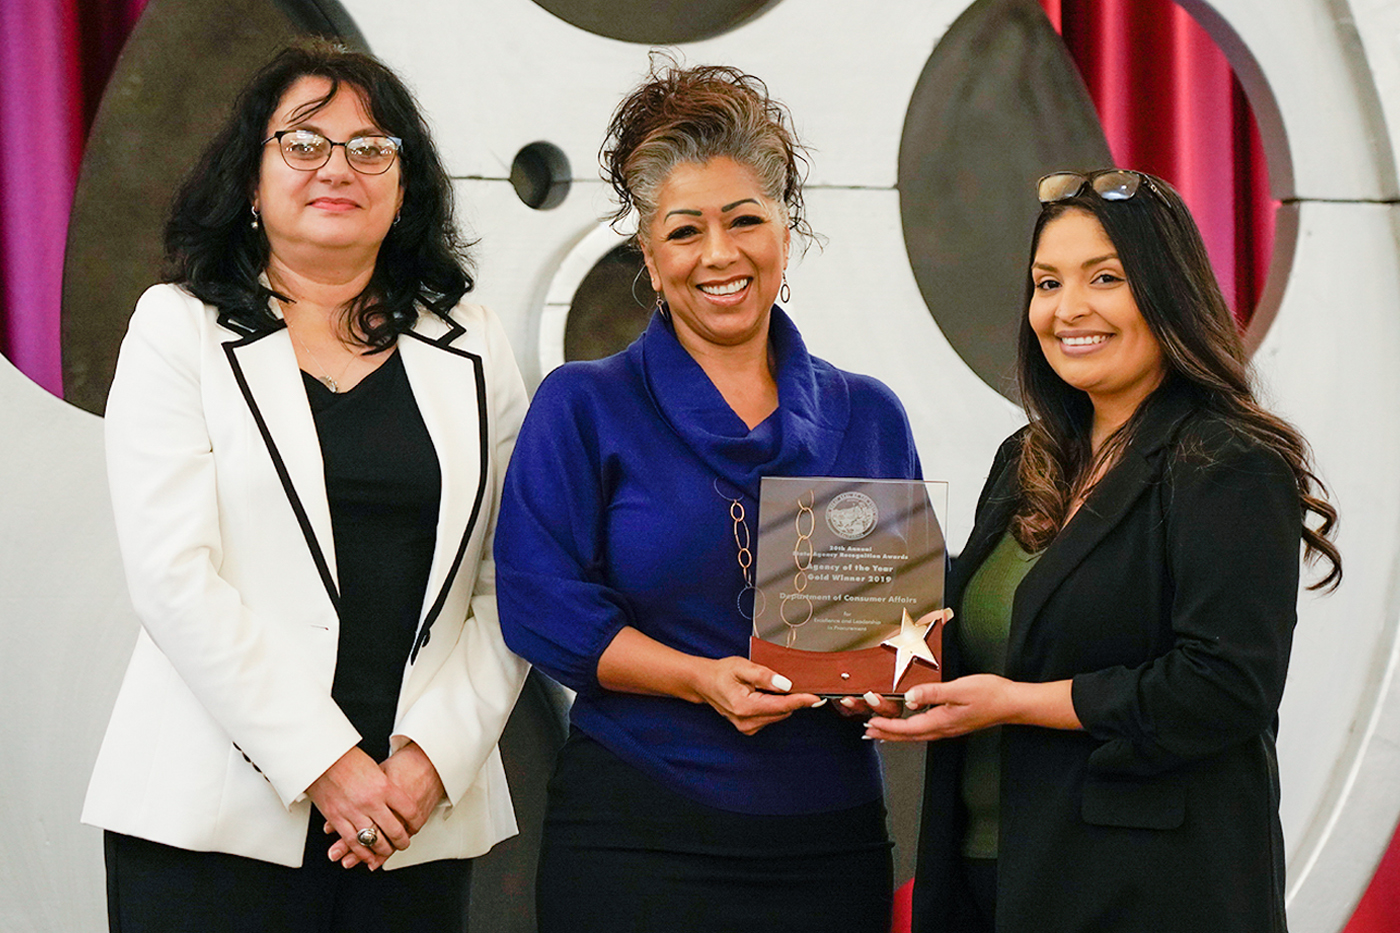 Anda Draghici, Department of General Services, presents the Department of Consumer Affairs with the Gold Agency of the Year award.